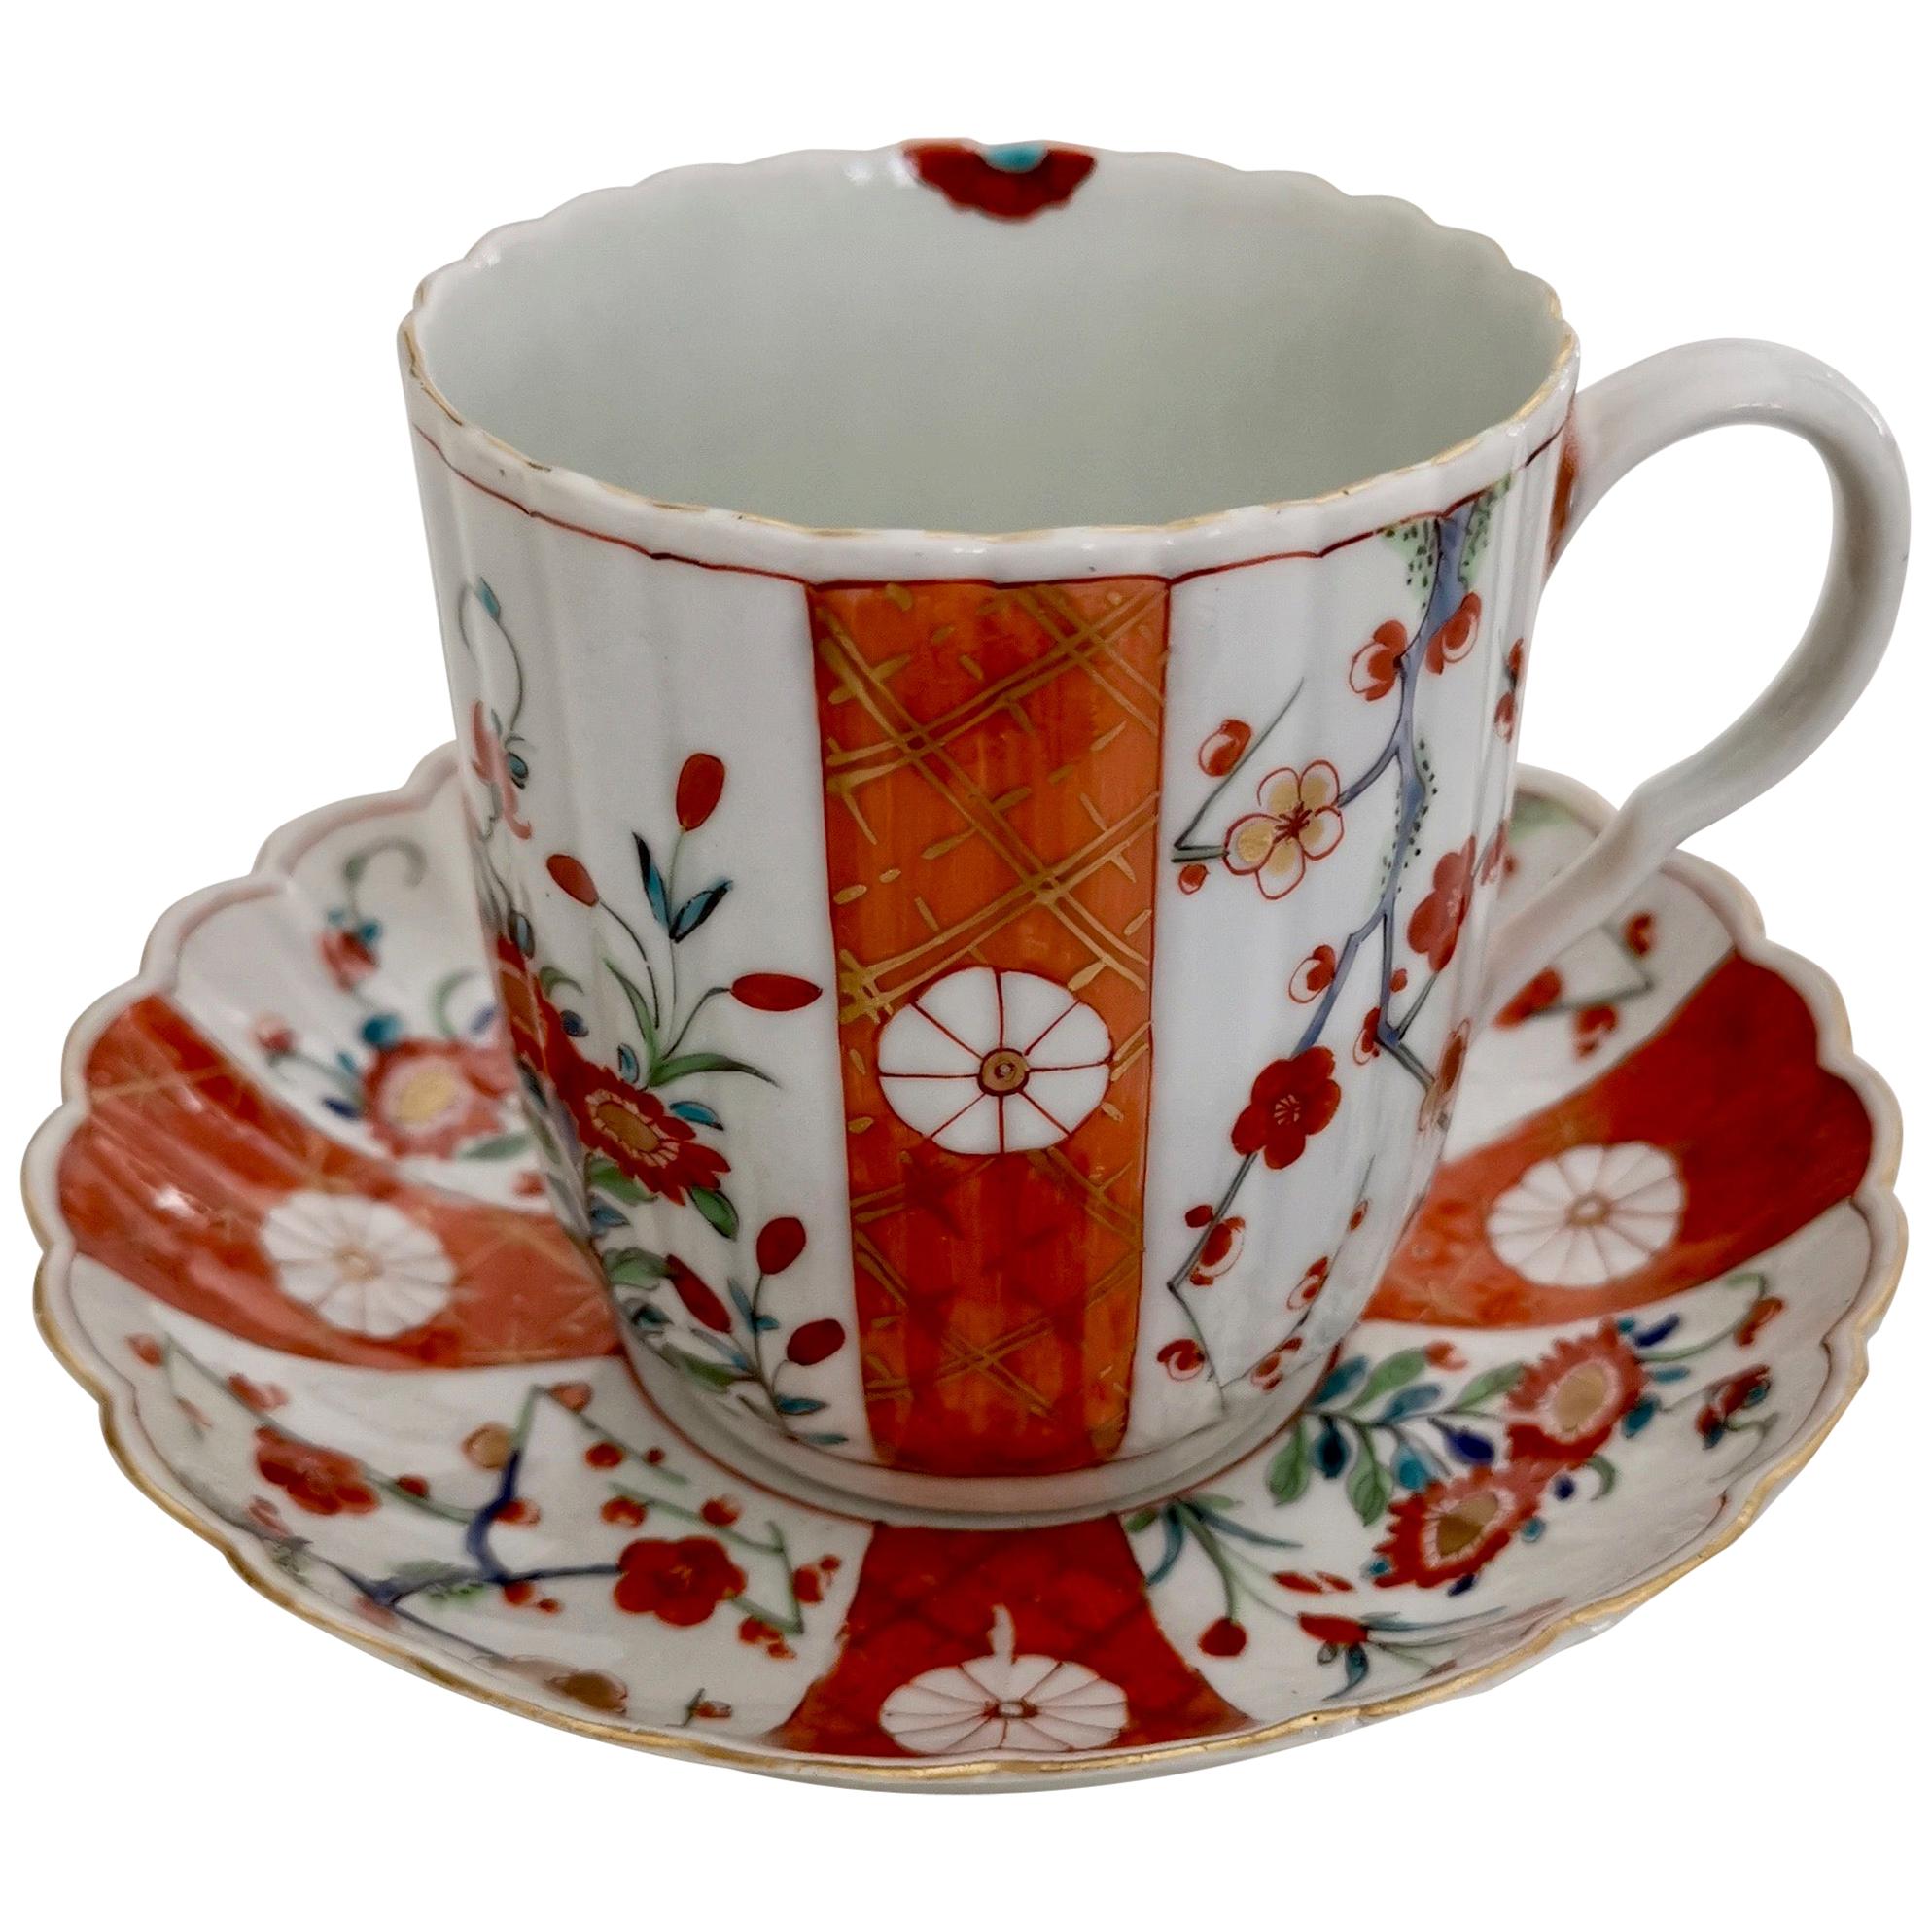 Worcester Porcelain Coffee Cup, Giles Old Scarlet Japan, 18th Century circa 1770